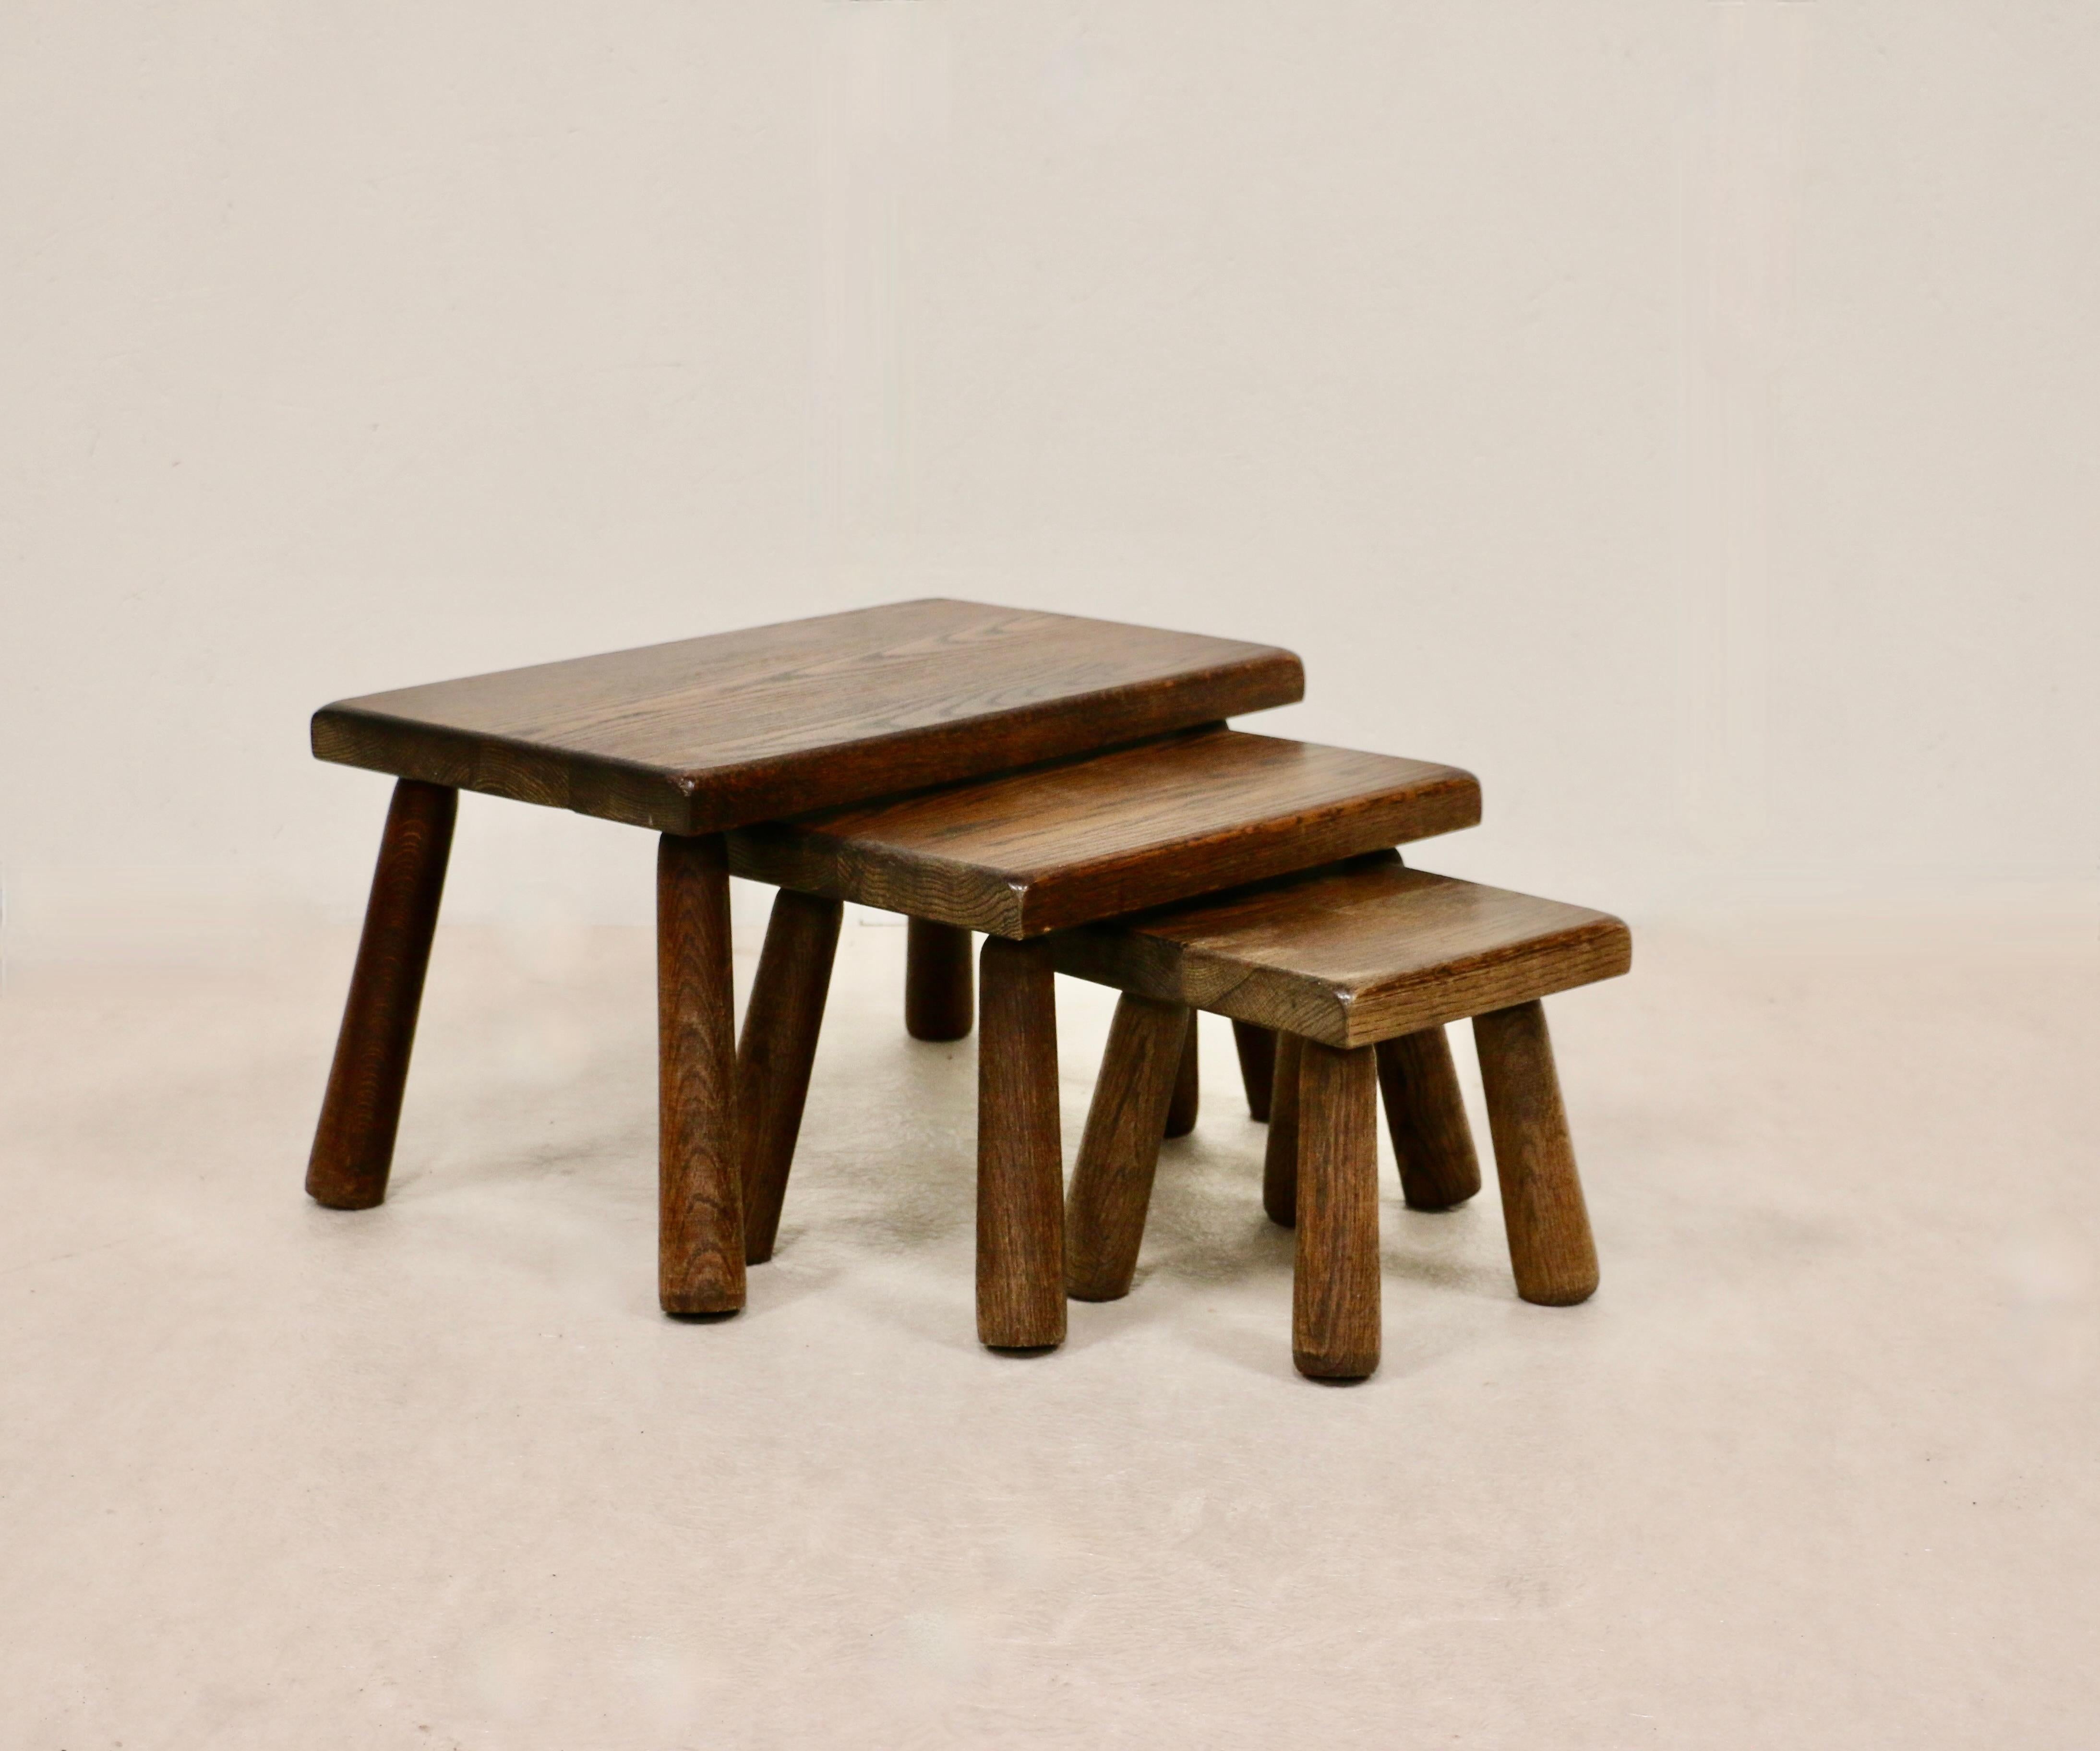 A series of three nesting tables in dark oak.
Cylindrical legs. France années 60.